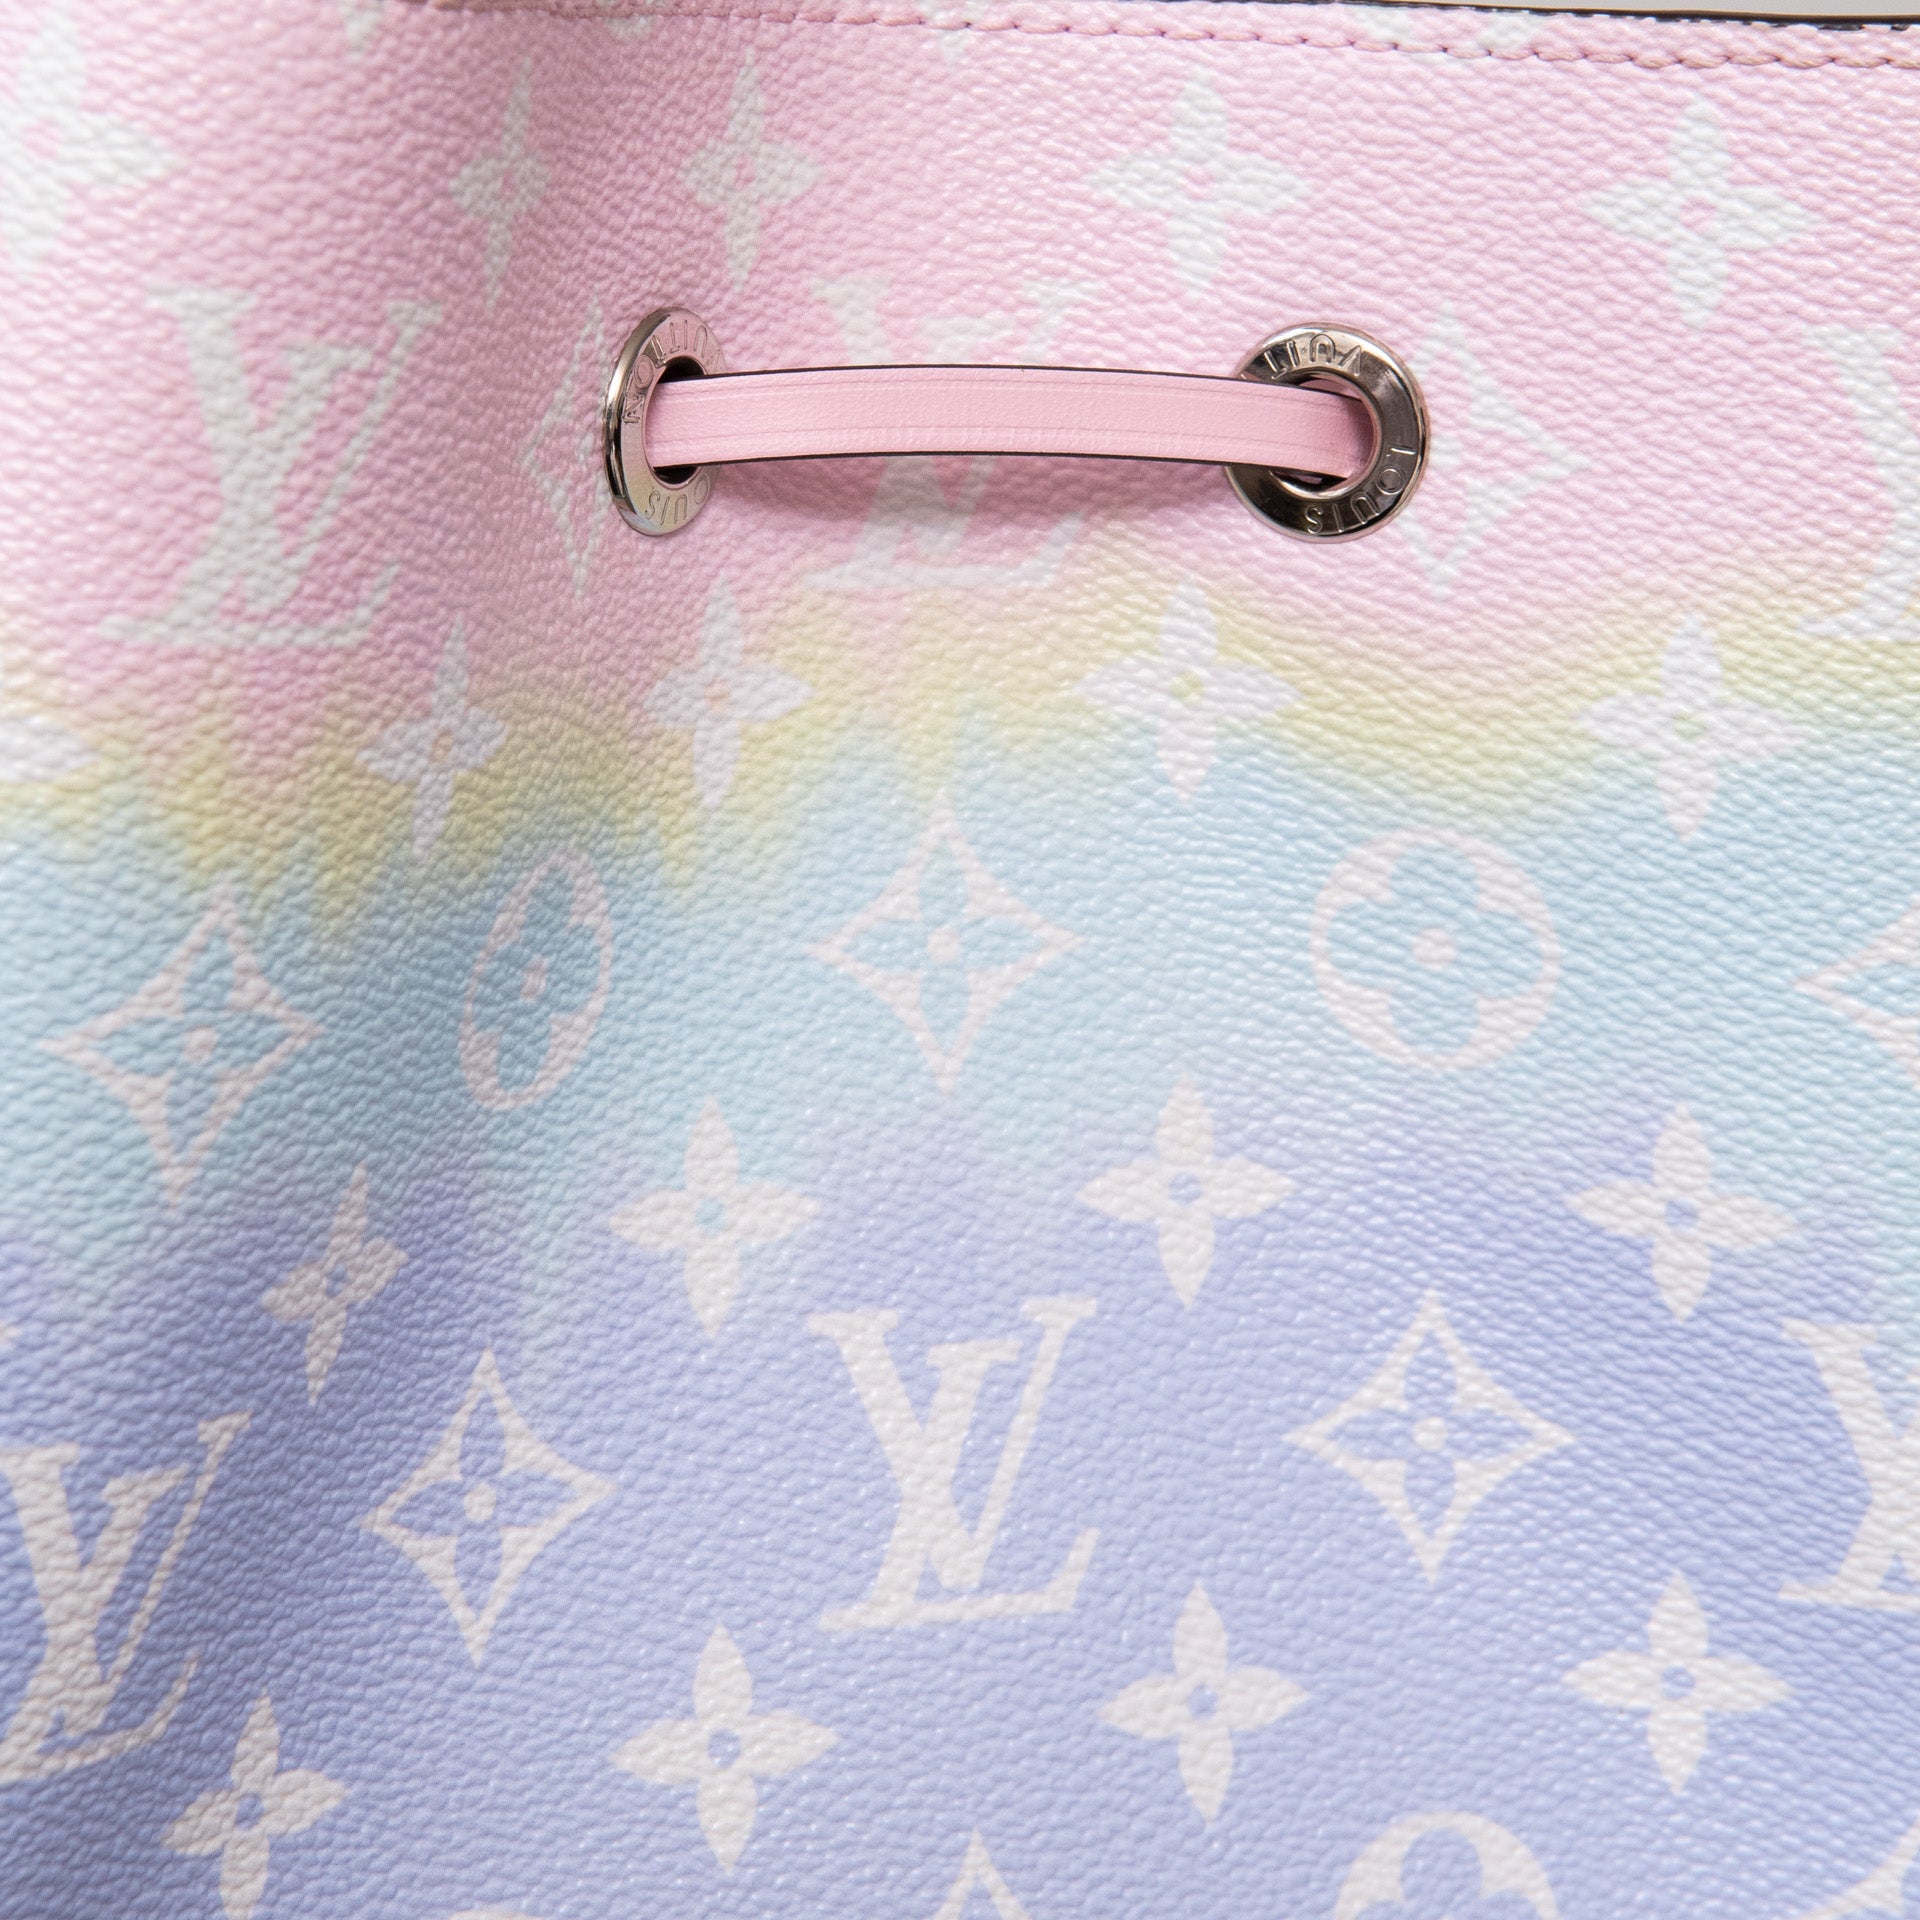 Louis Vuitton Limited Edition Neo Noe Pastel Bag - Image 9 of 12